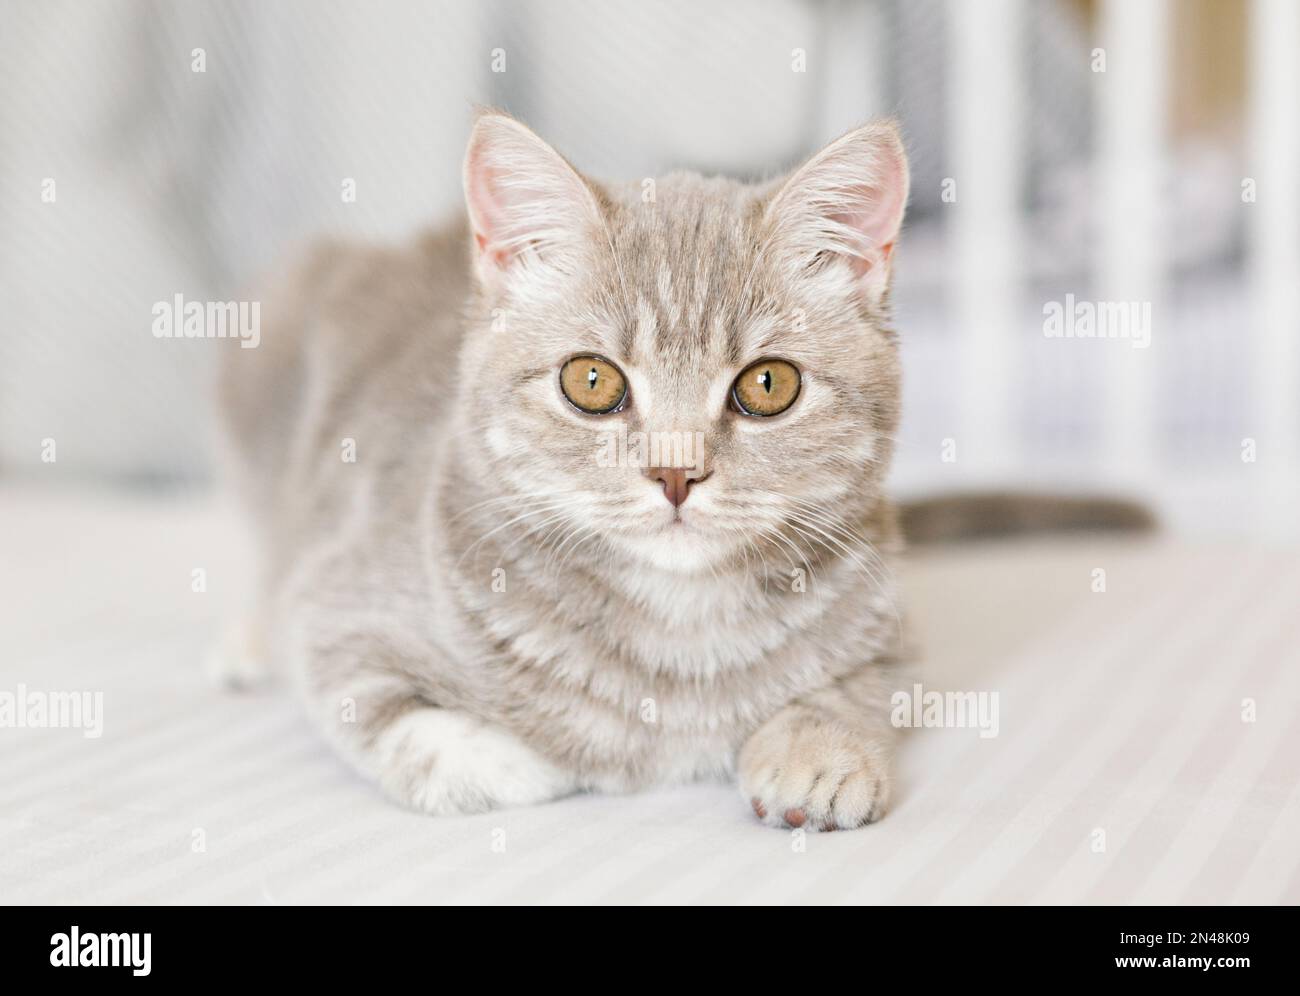 Adorable Scottish straight tabby cat on the white background. Stock Photo